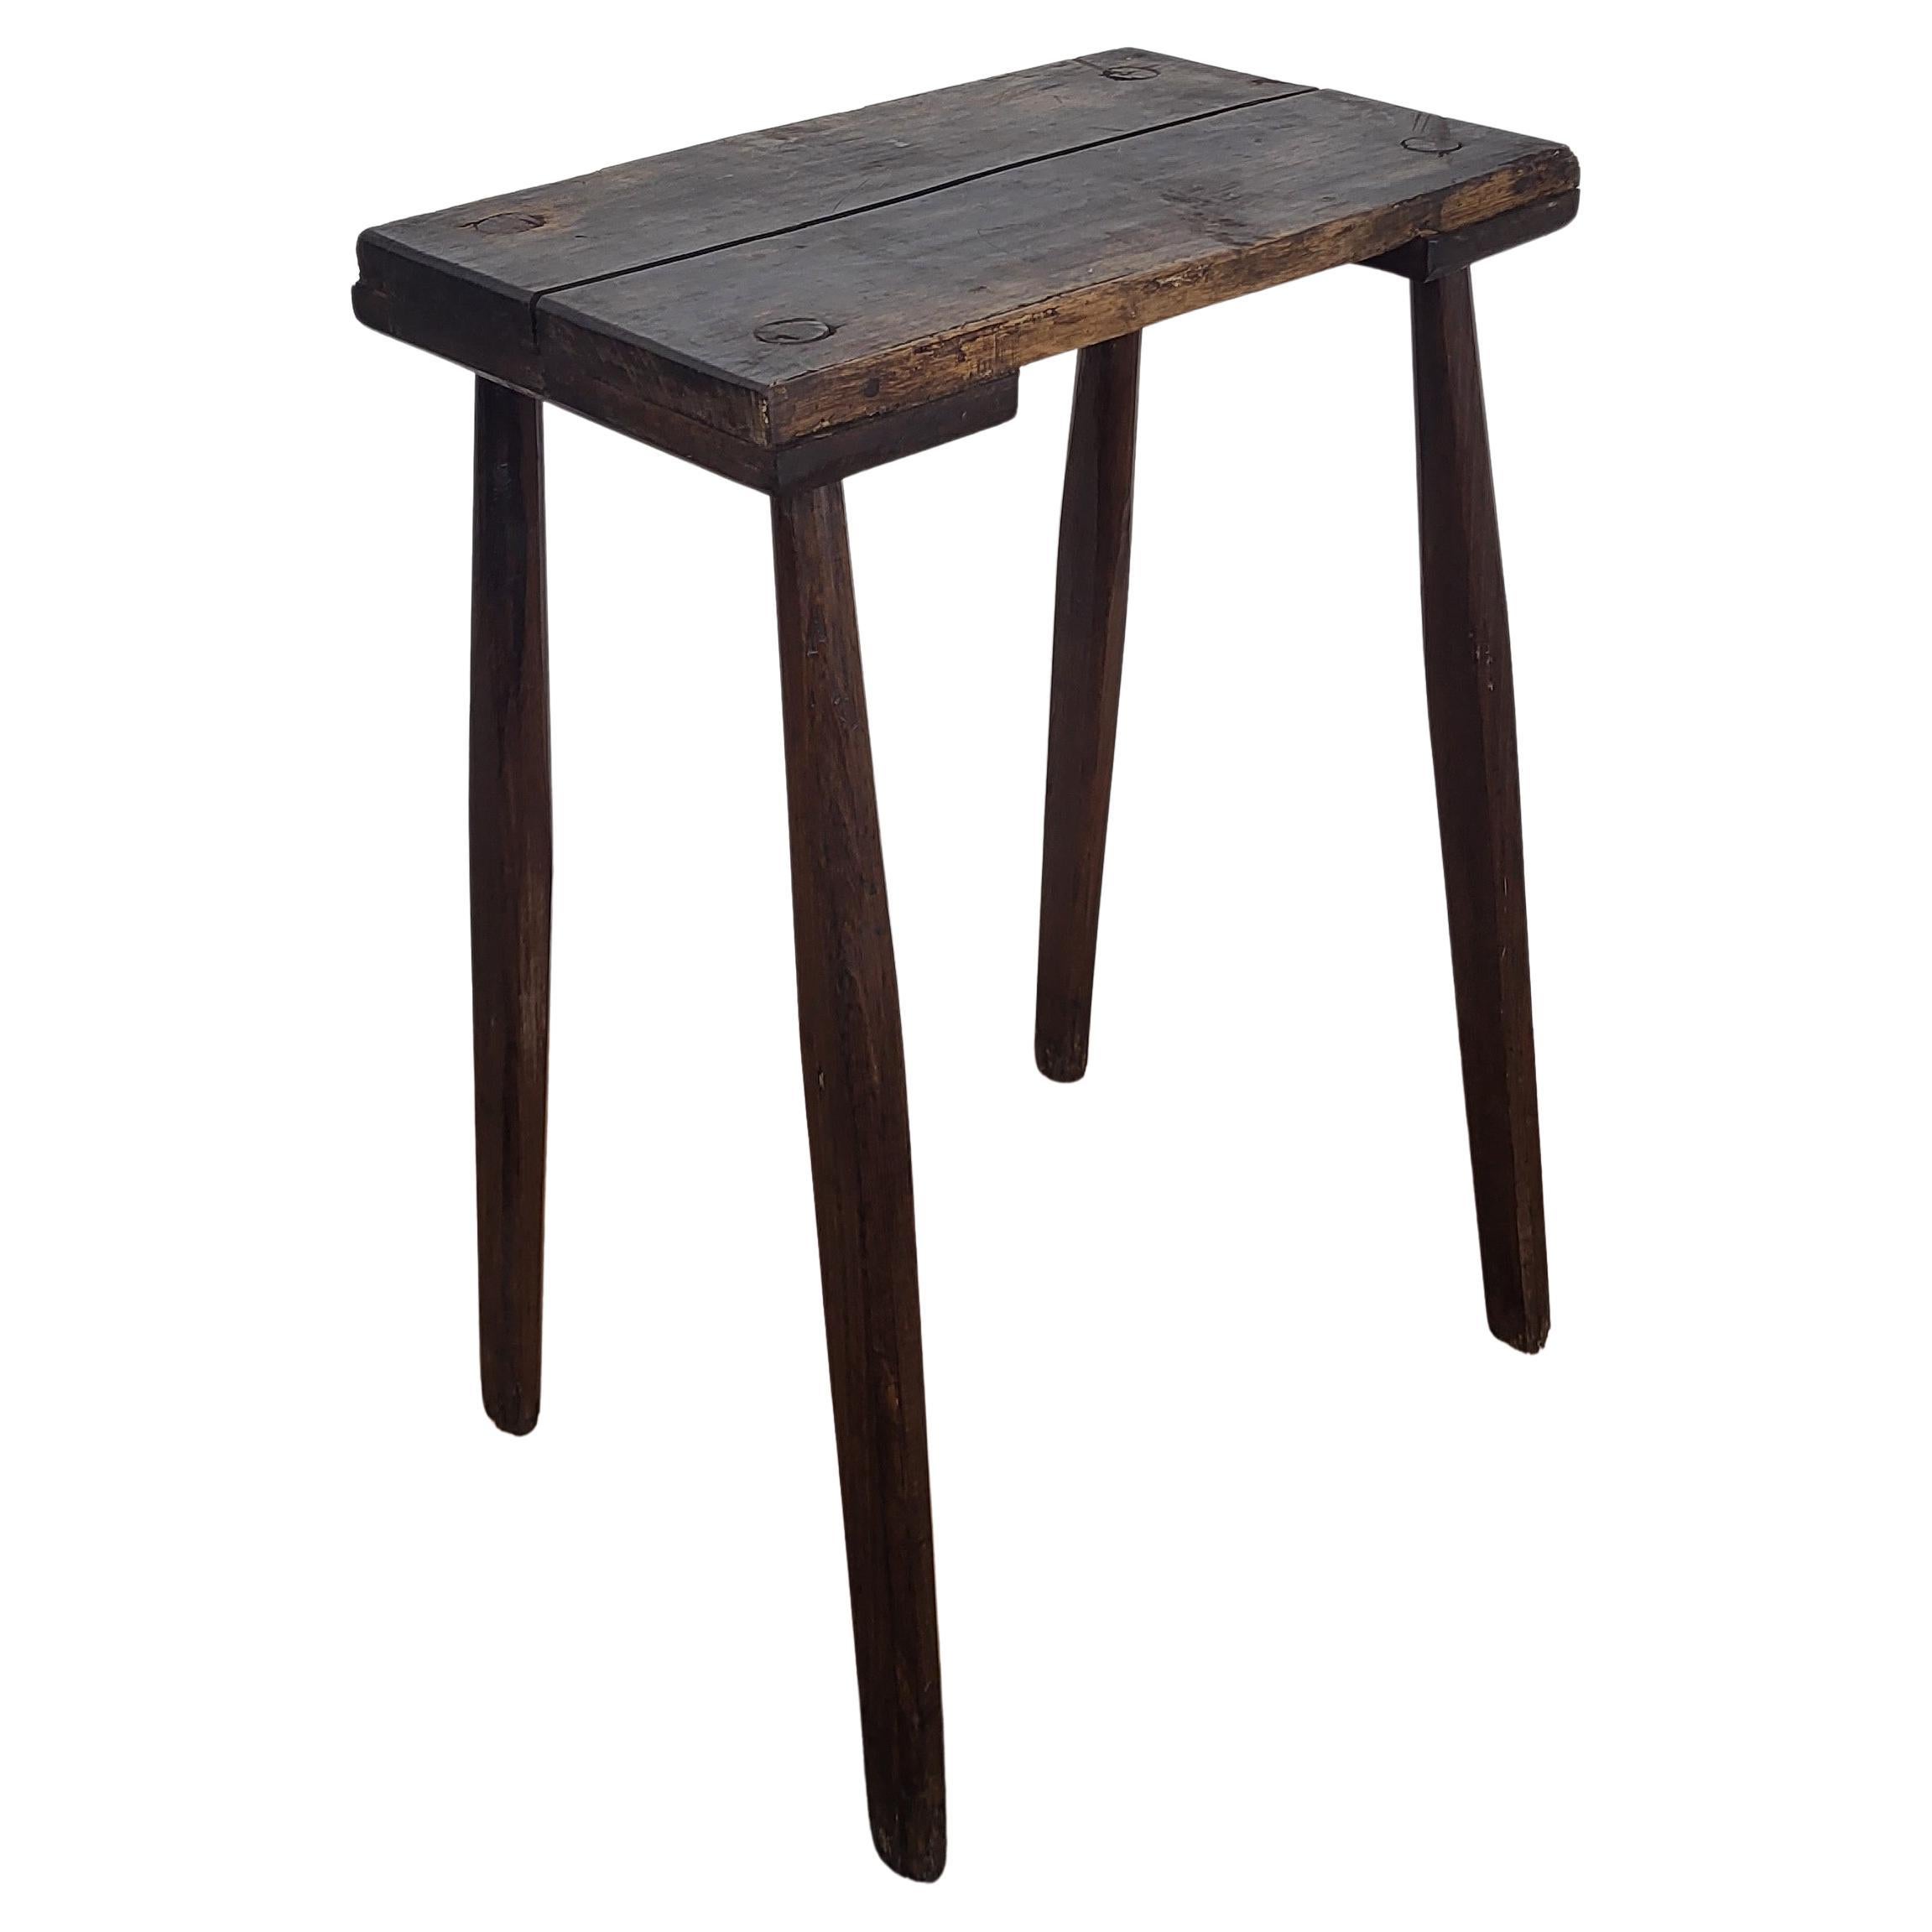 Primitive Rustic Minimal Italian Wooden Side Table For Sale